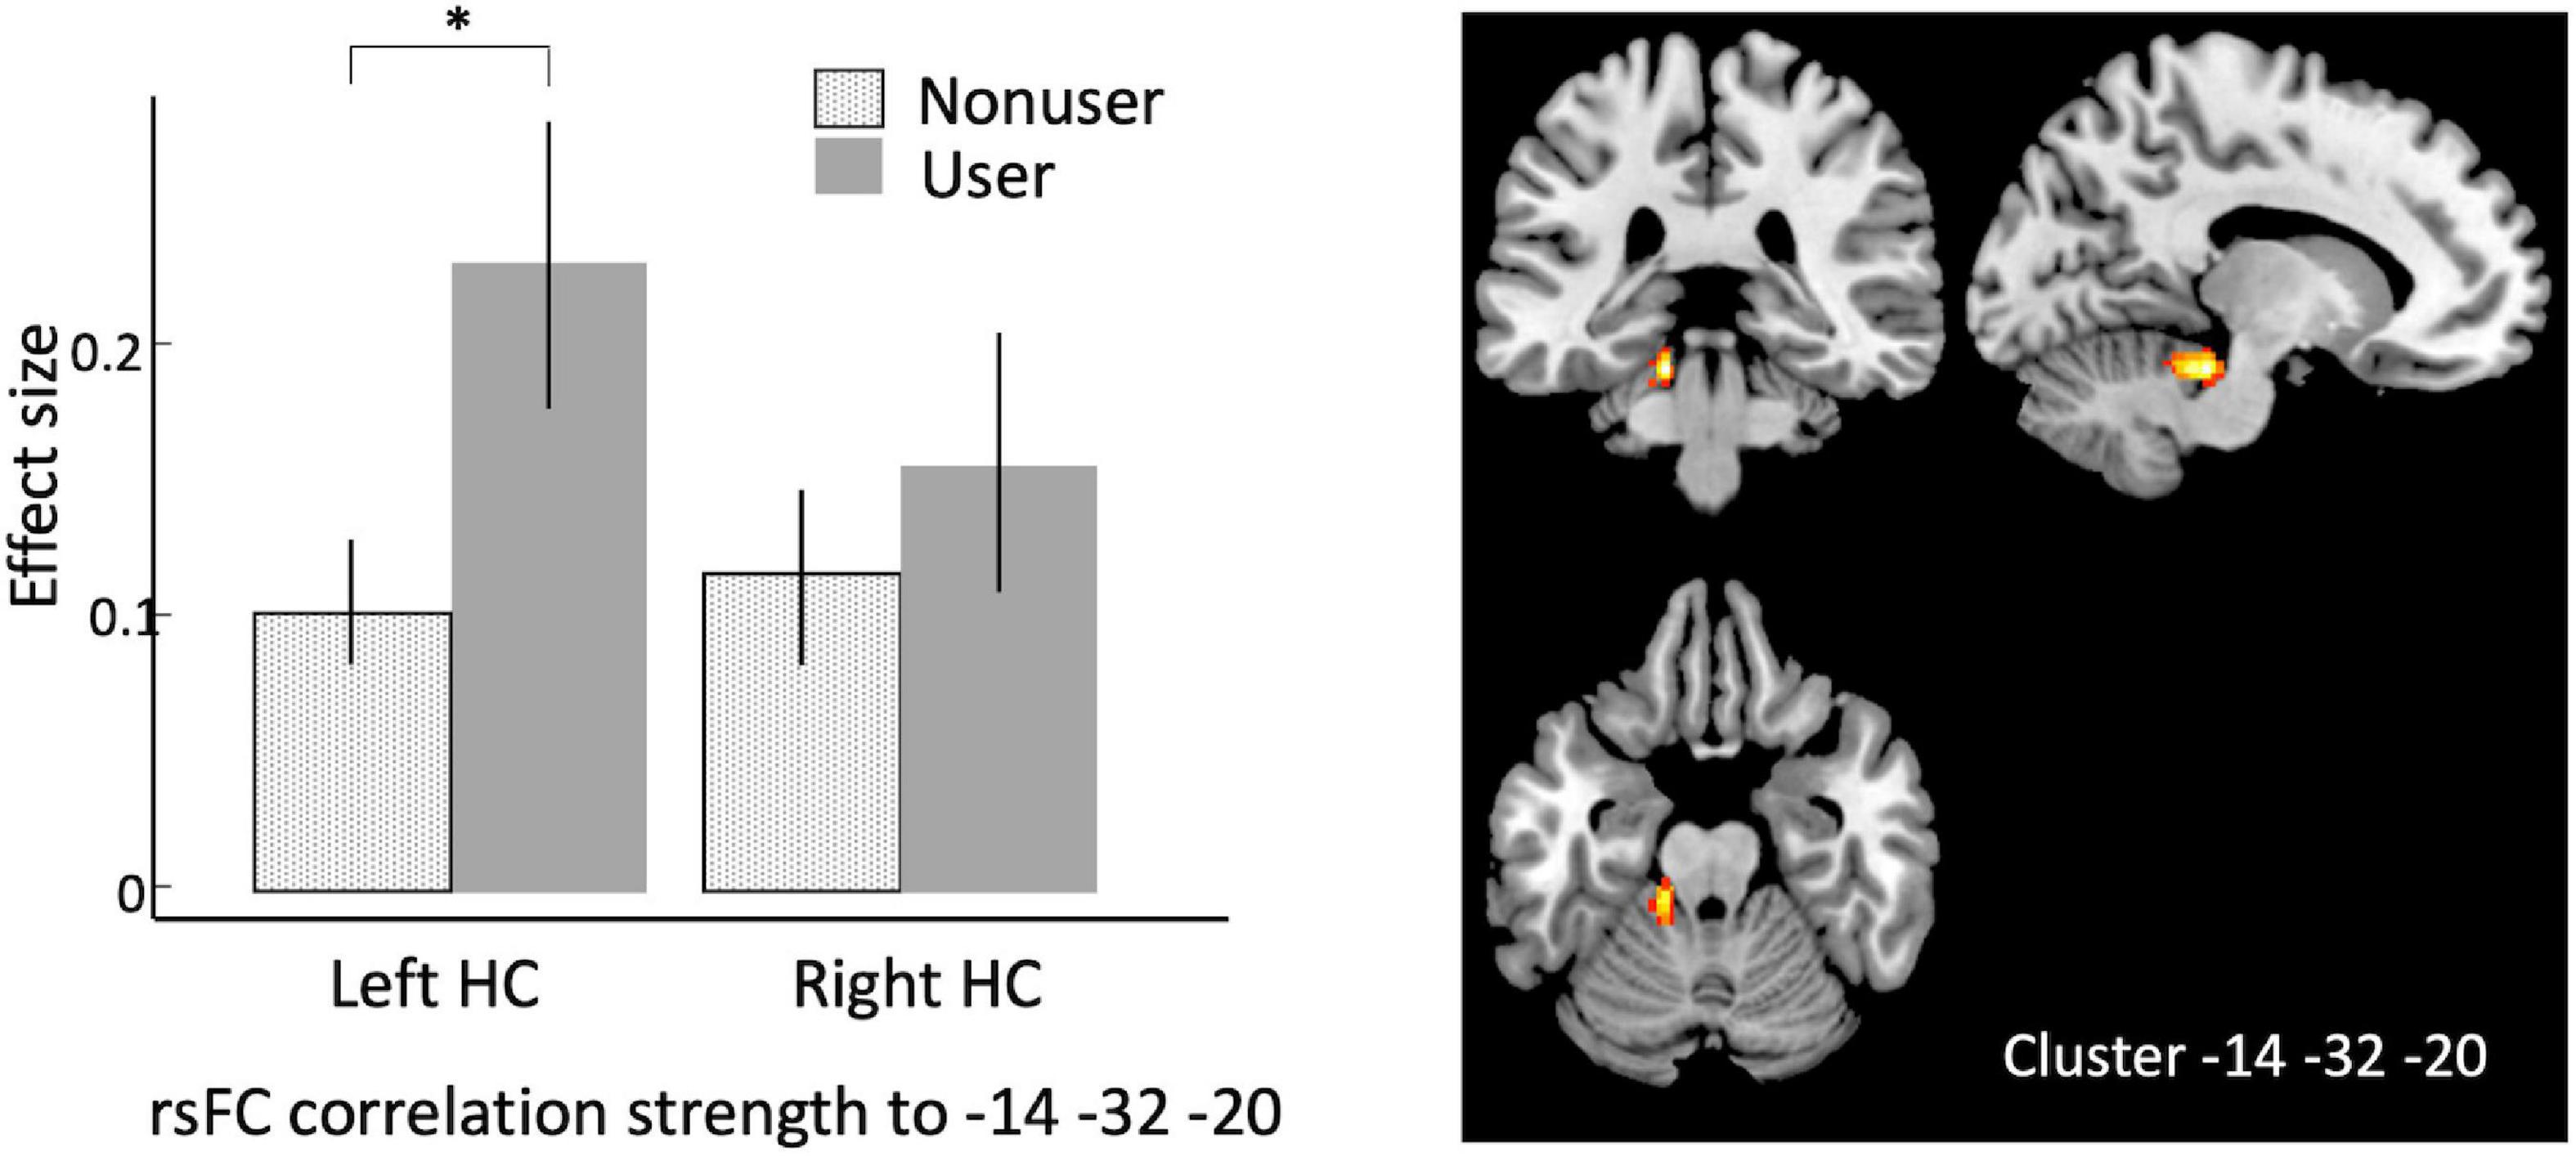 Bayesian causal network modeling suggests adolescent cannabis use  accelerates prefrontal cortical thinning